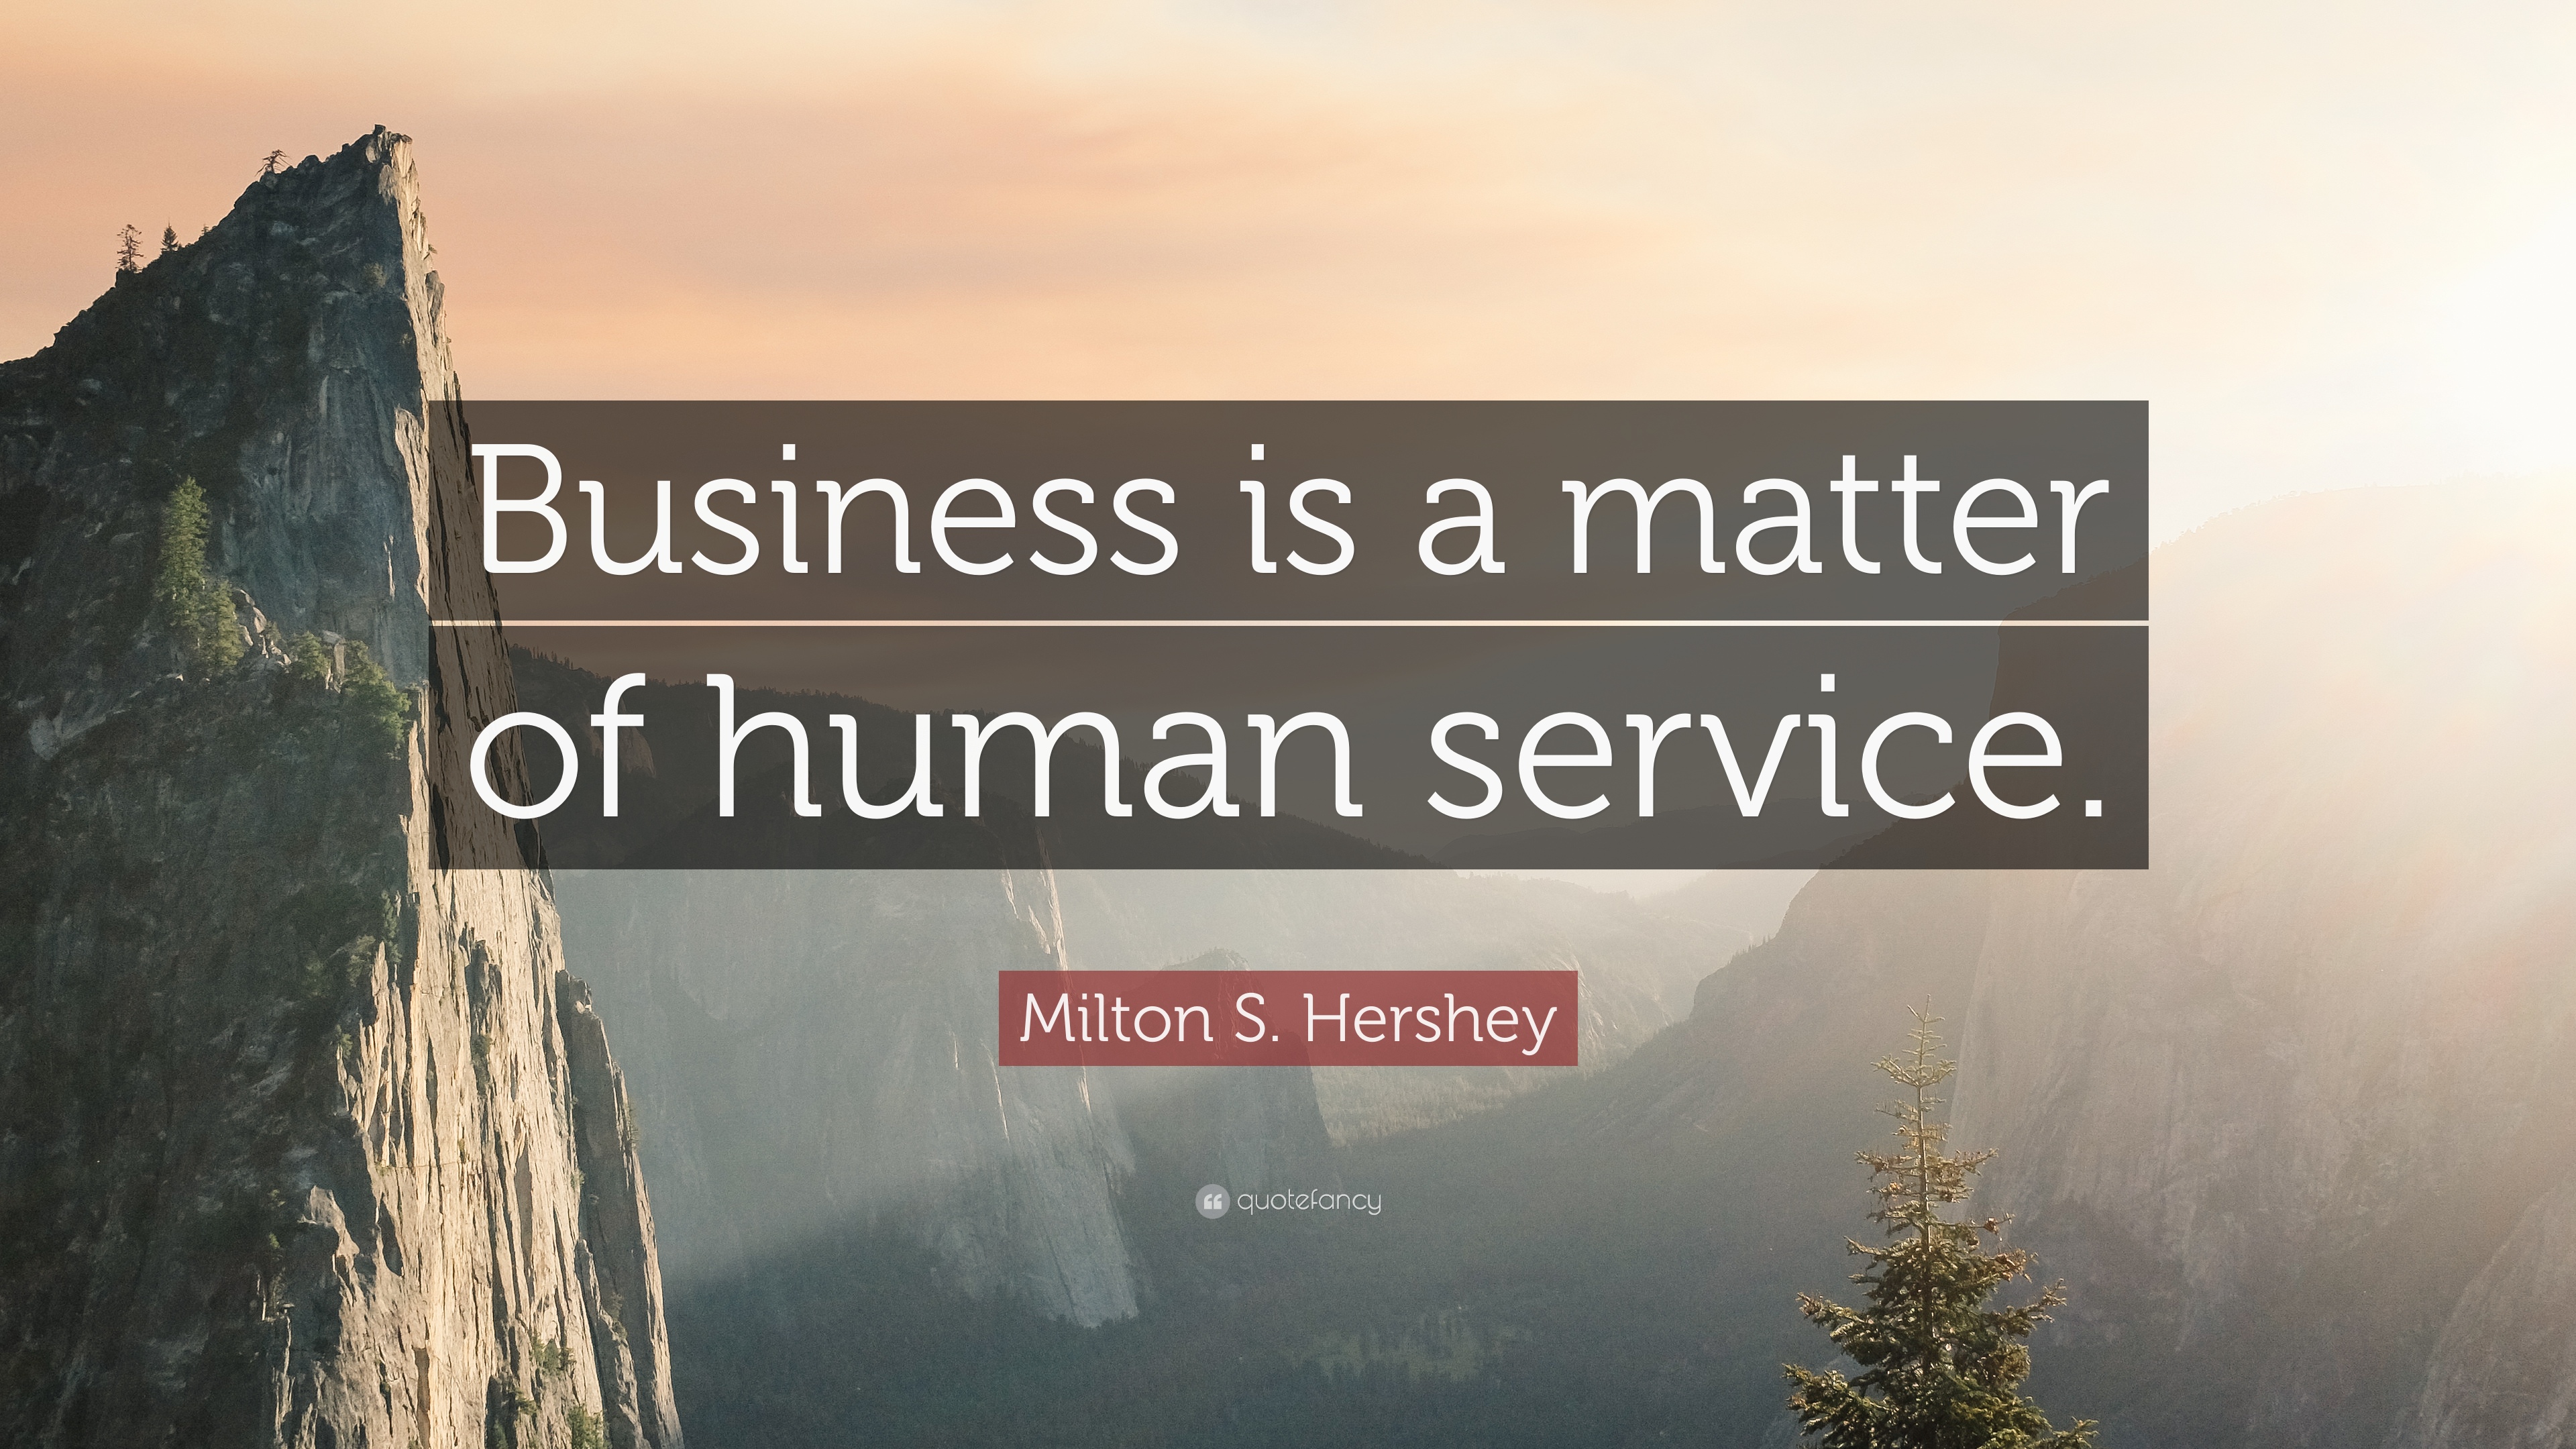 Milton S. Hershey Quote: “Business is a matter of human service.” 7